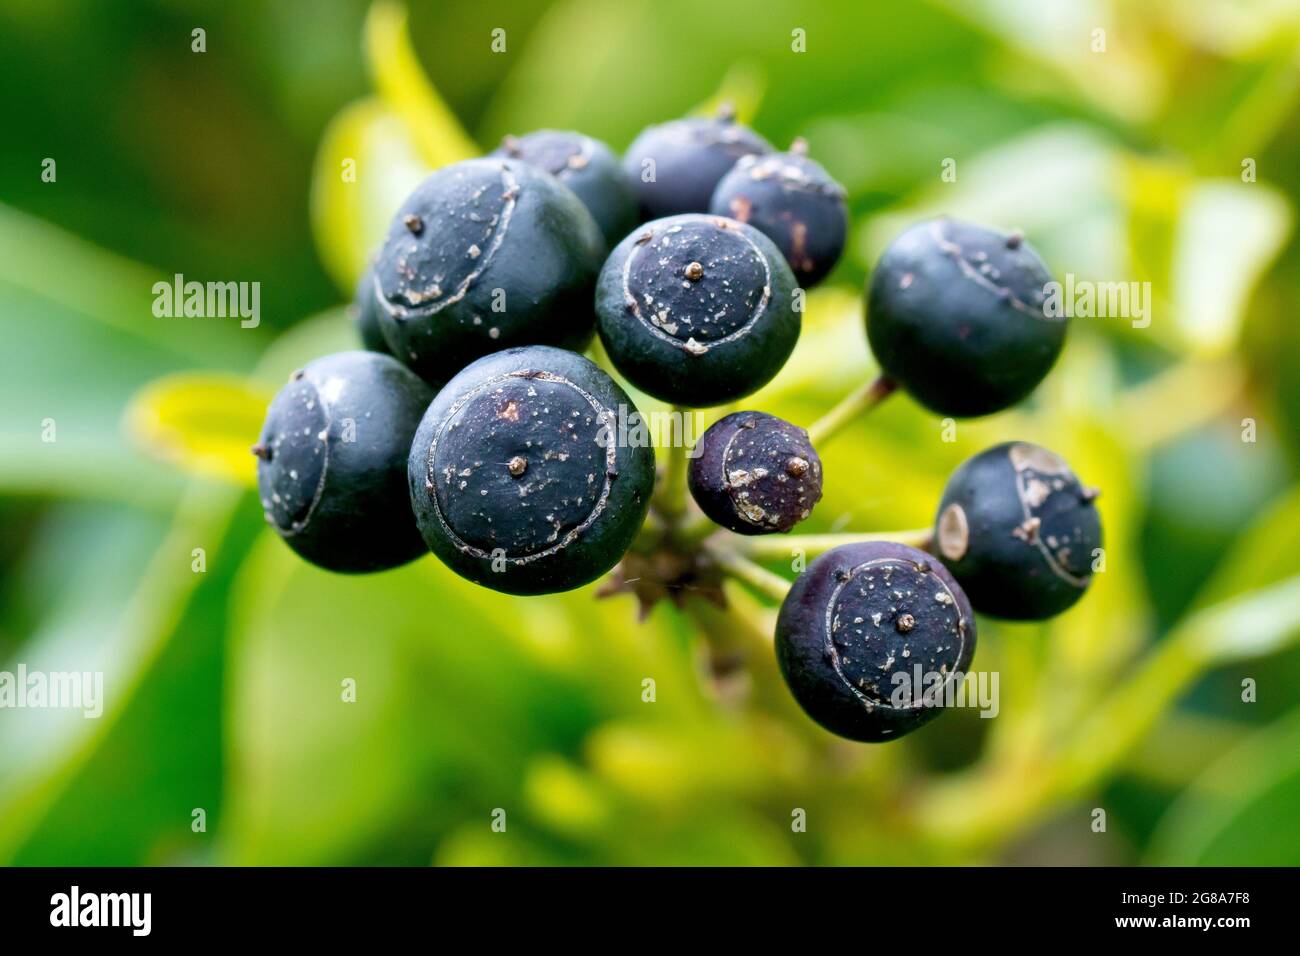 Ivy (hedera helix), close up of the black berry-like fruit that ripens on the plant over the winter. Stock Photo